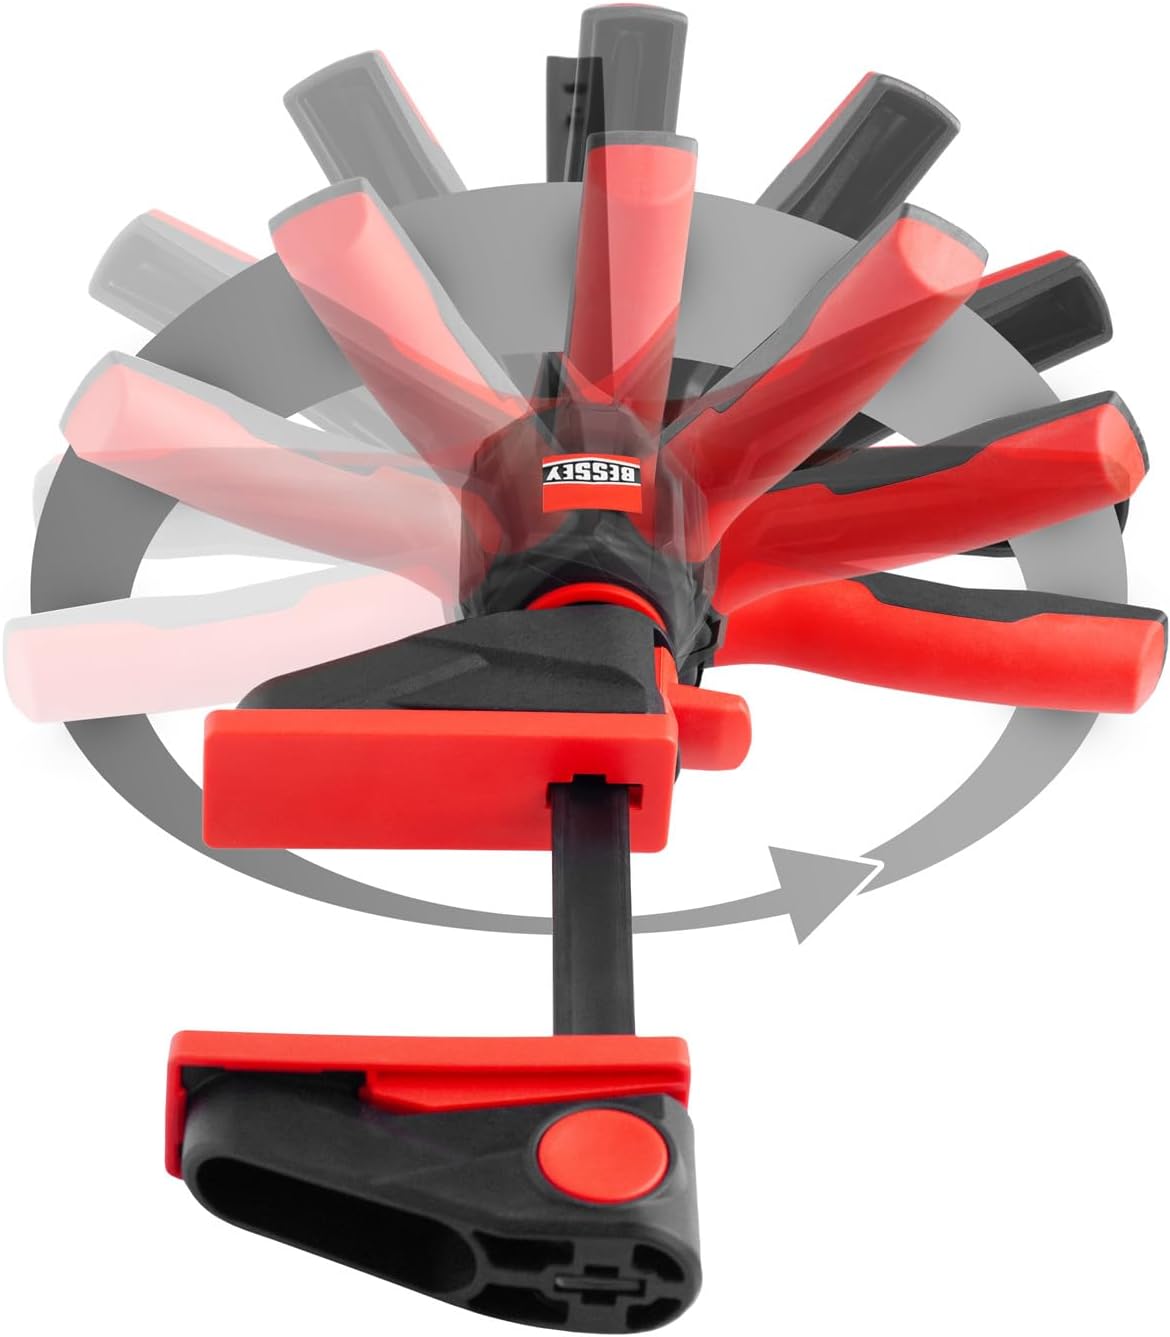 Bessey EZ360 - One-hand clamping screw with 360° rotating handle